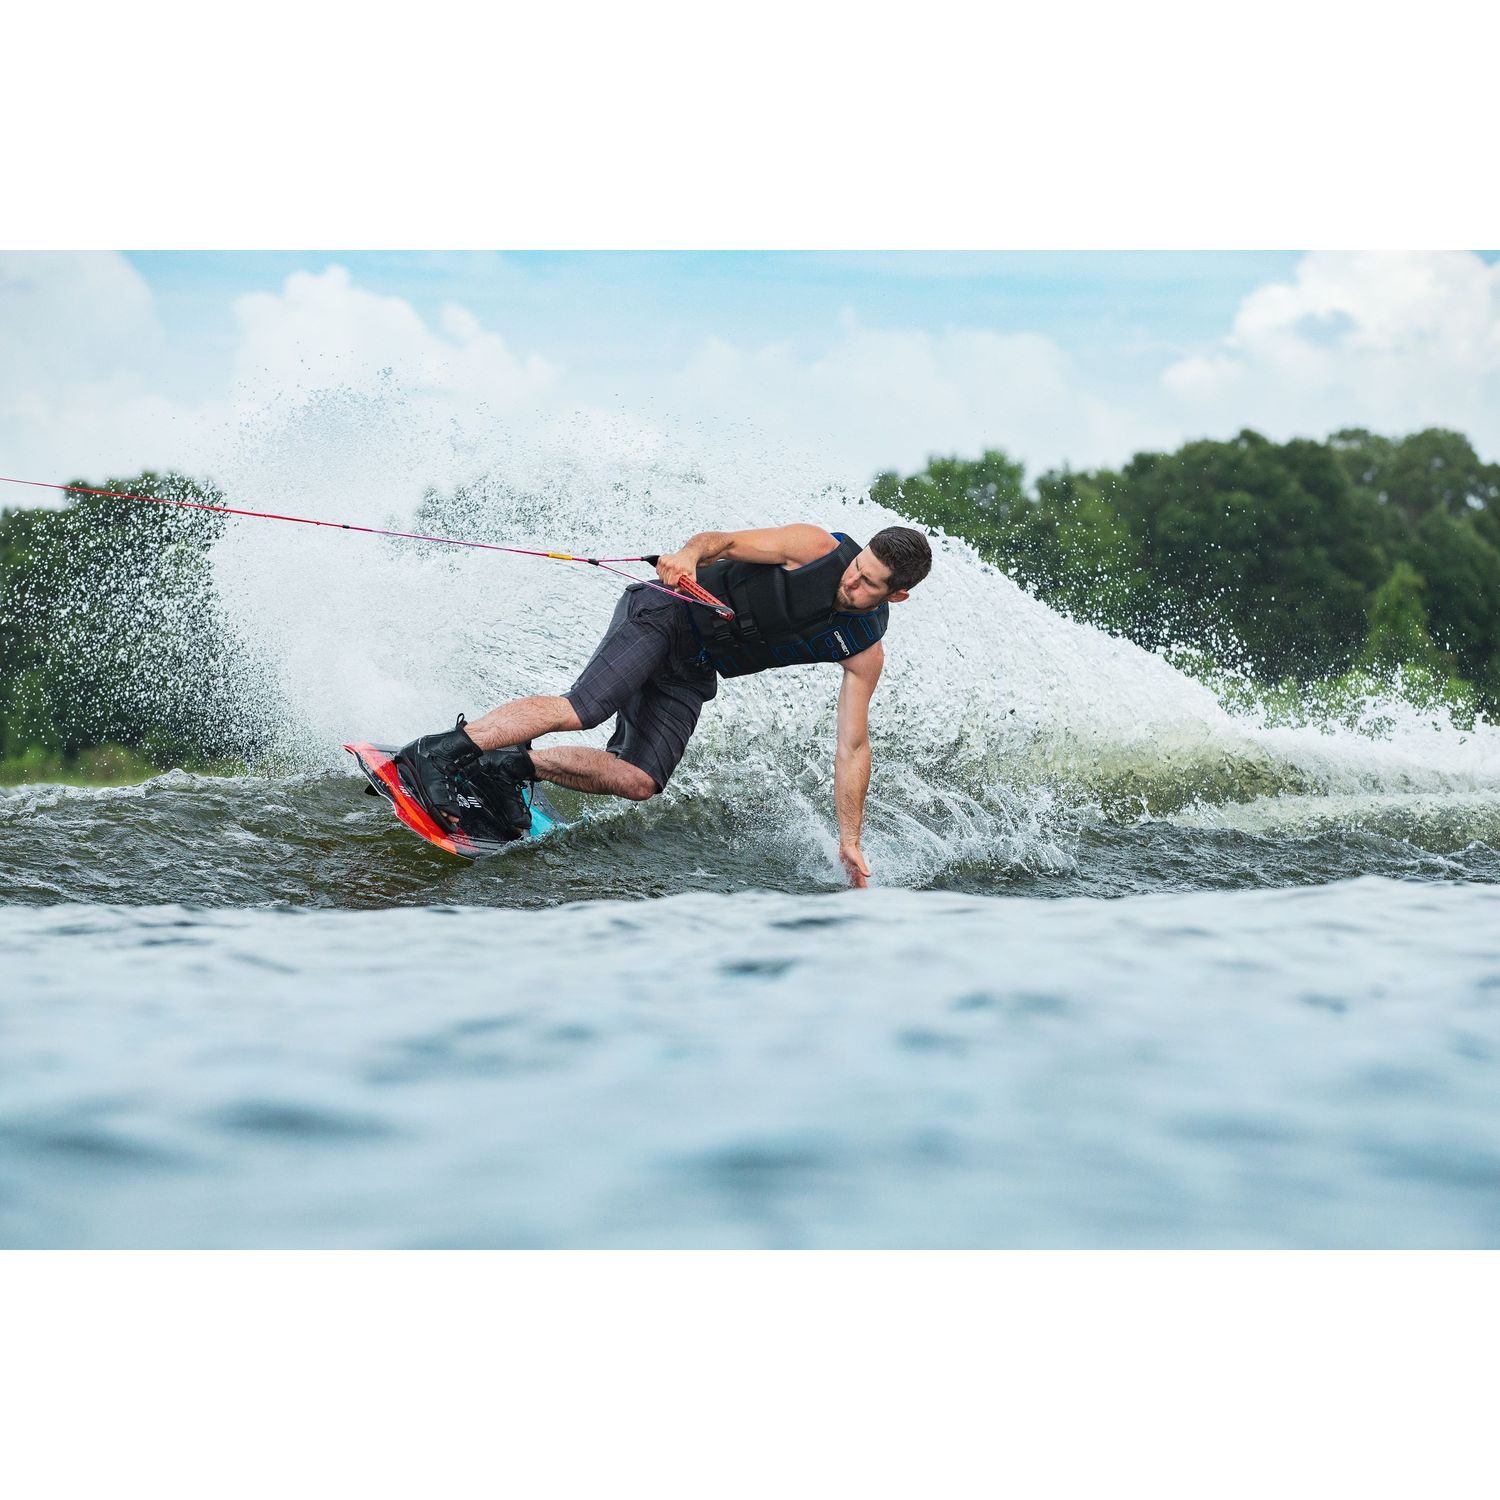 O'brien Wakeboard System 135